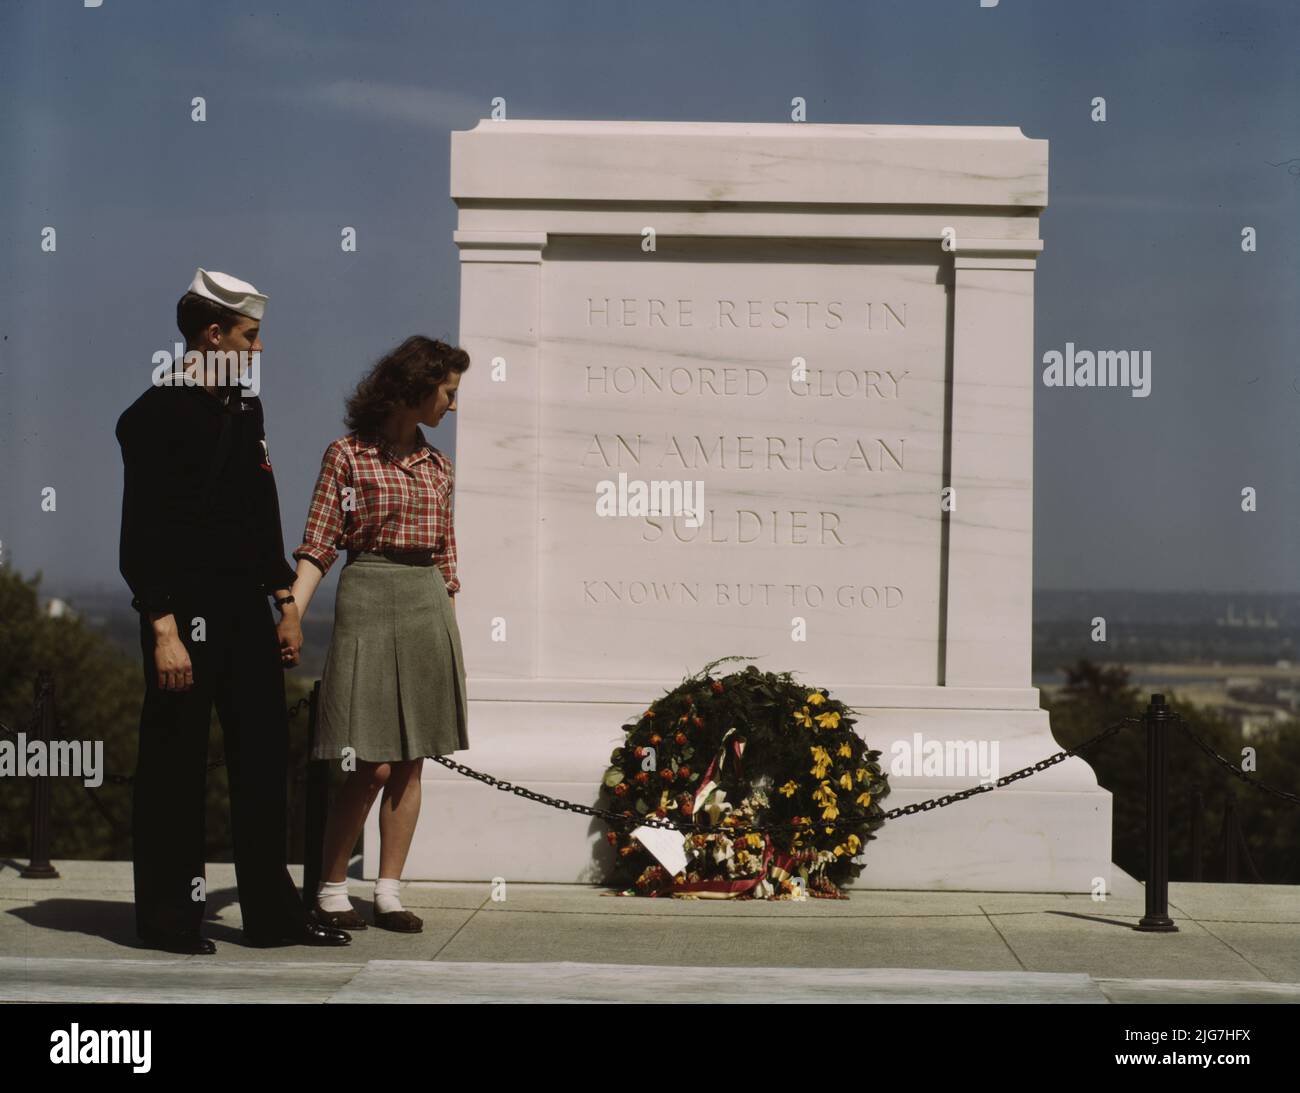 Sailor and girl at the Tomb of the Unknown Soldier, Washington, D.C. Photo shows sailor with Margaraet Mary CcCloskey [sic. Margaret Mary McCloskey?. Inscription on tomb: 'Here Rests in Honored Glory An American Soldier Known But To God']. Stock Photo